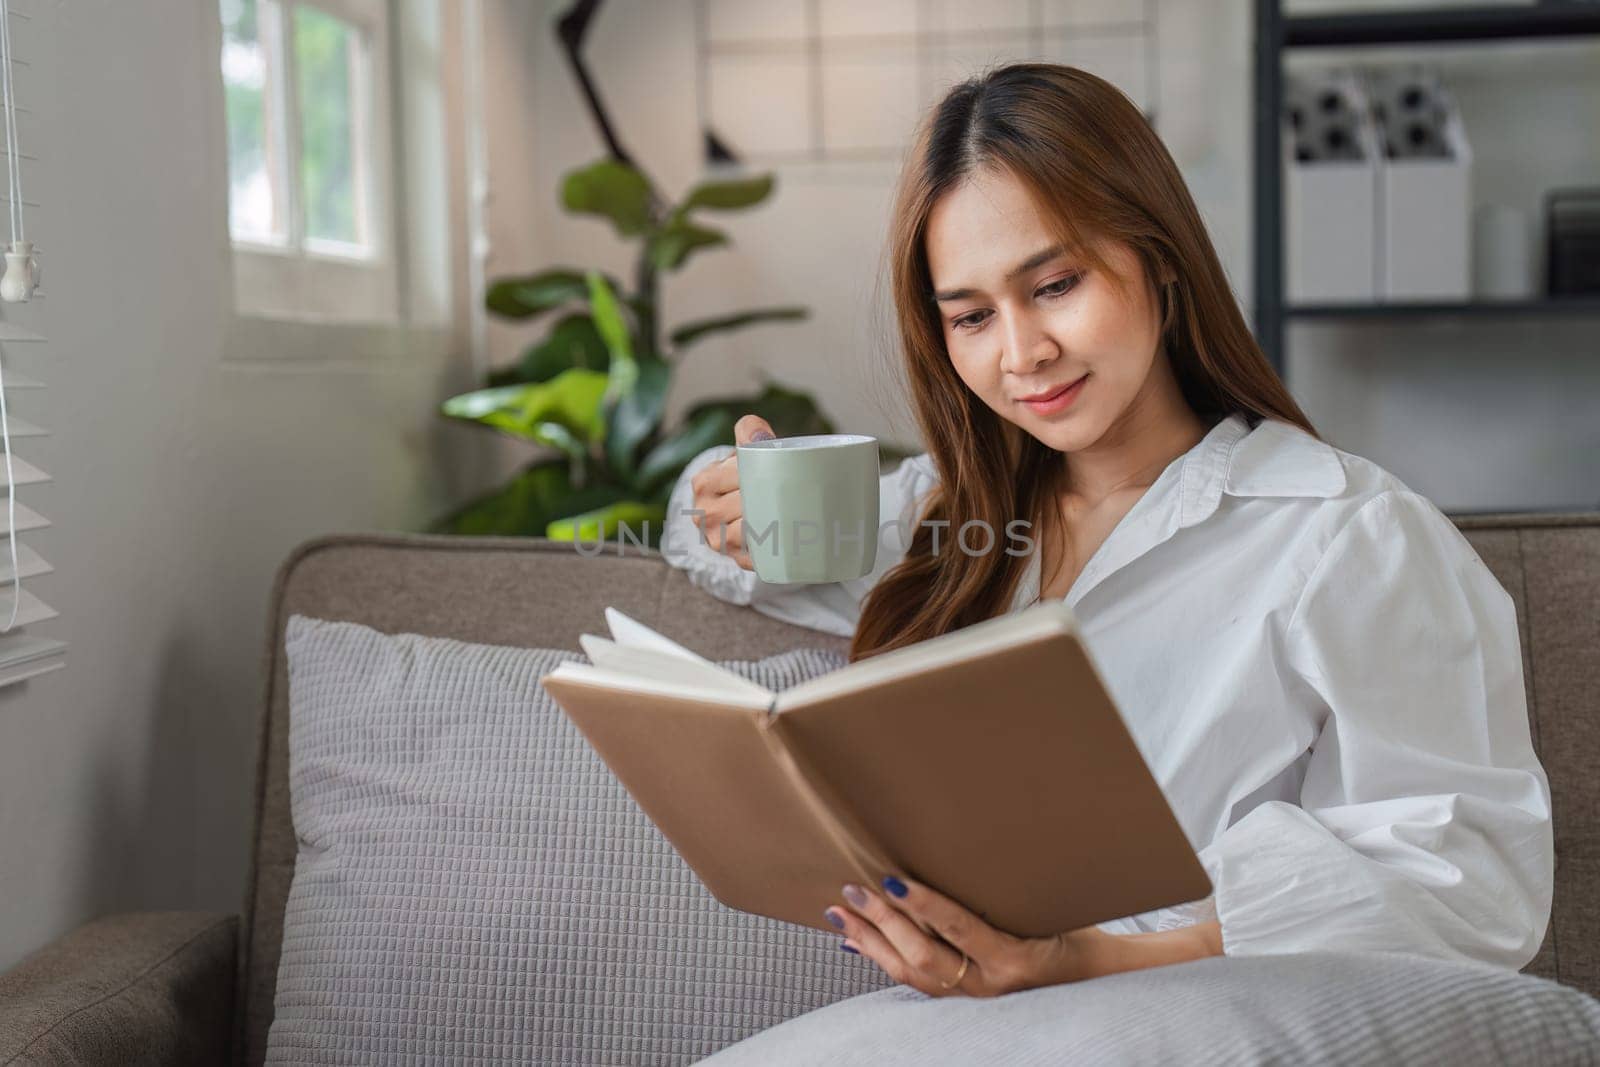 A young woman starts her day with a relaxing morning routine, enjoying a cup of coffee and reading a book in a cozy, modern living room.